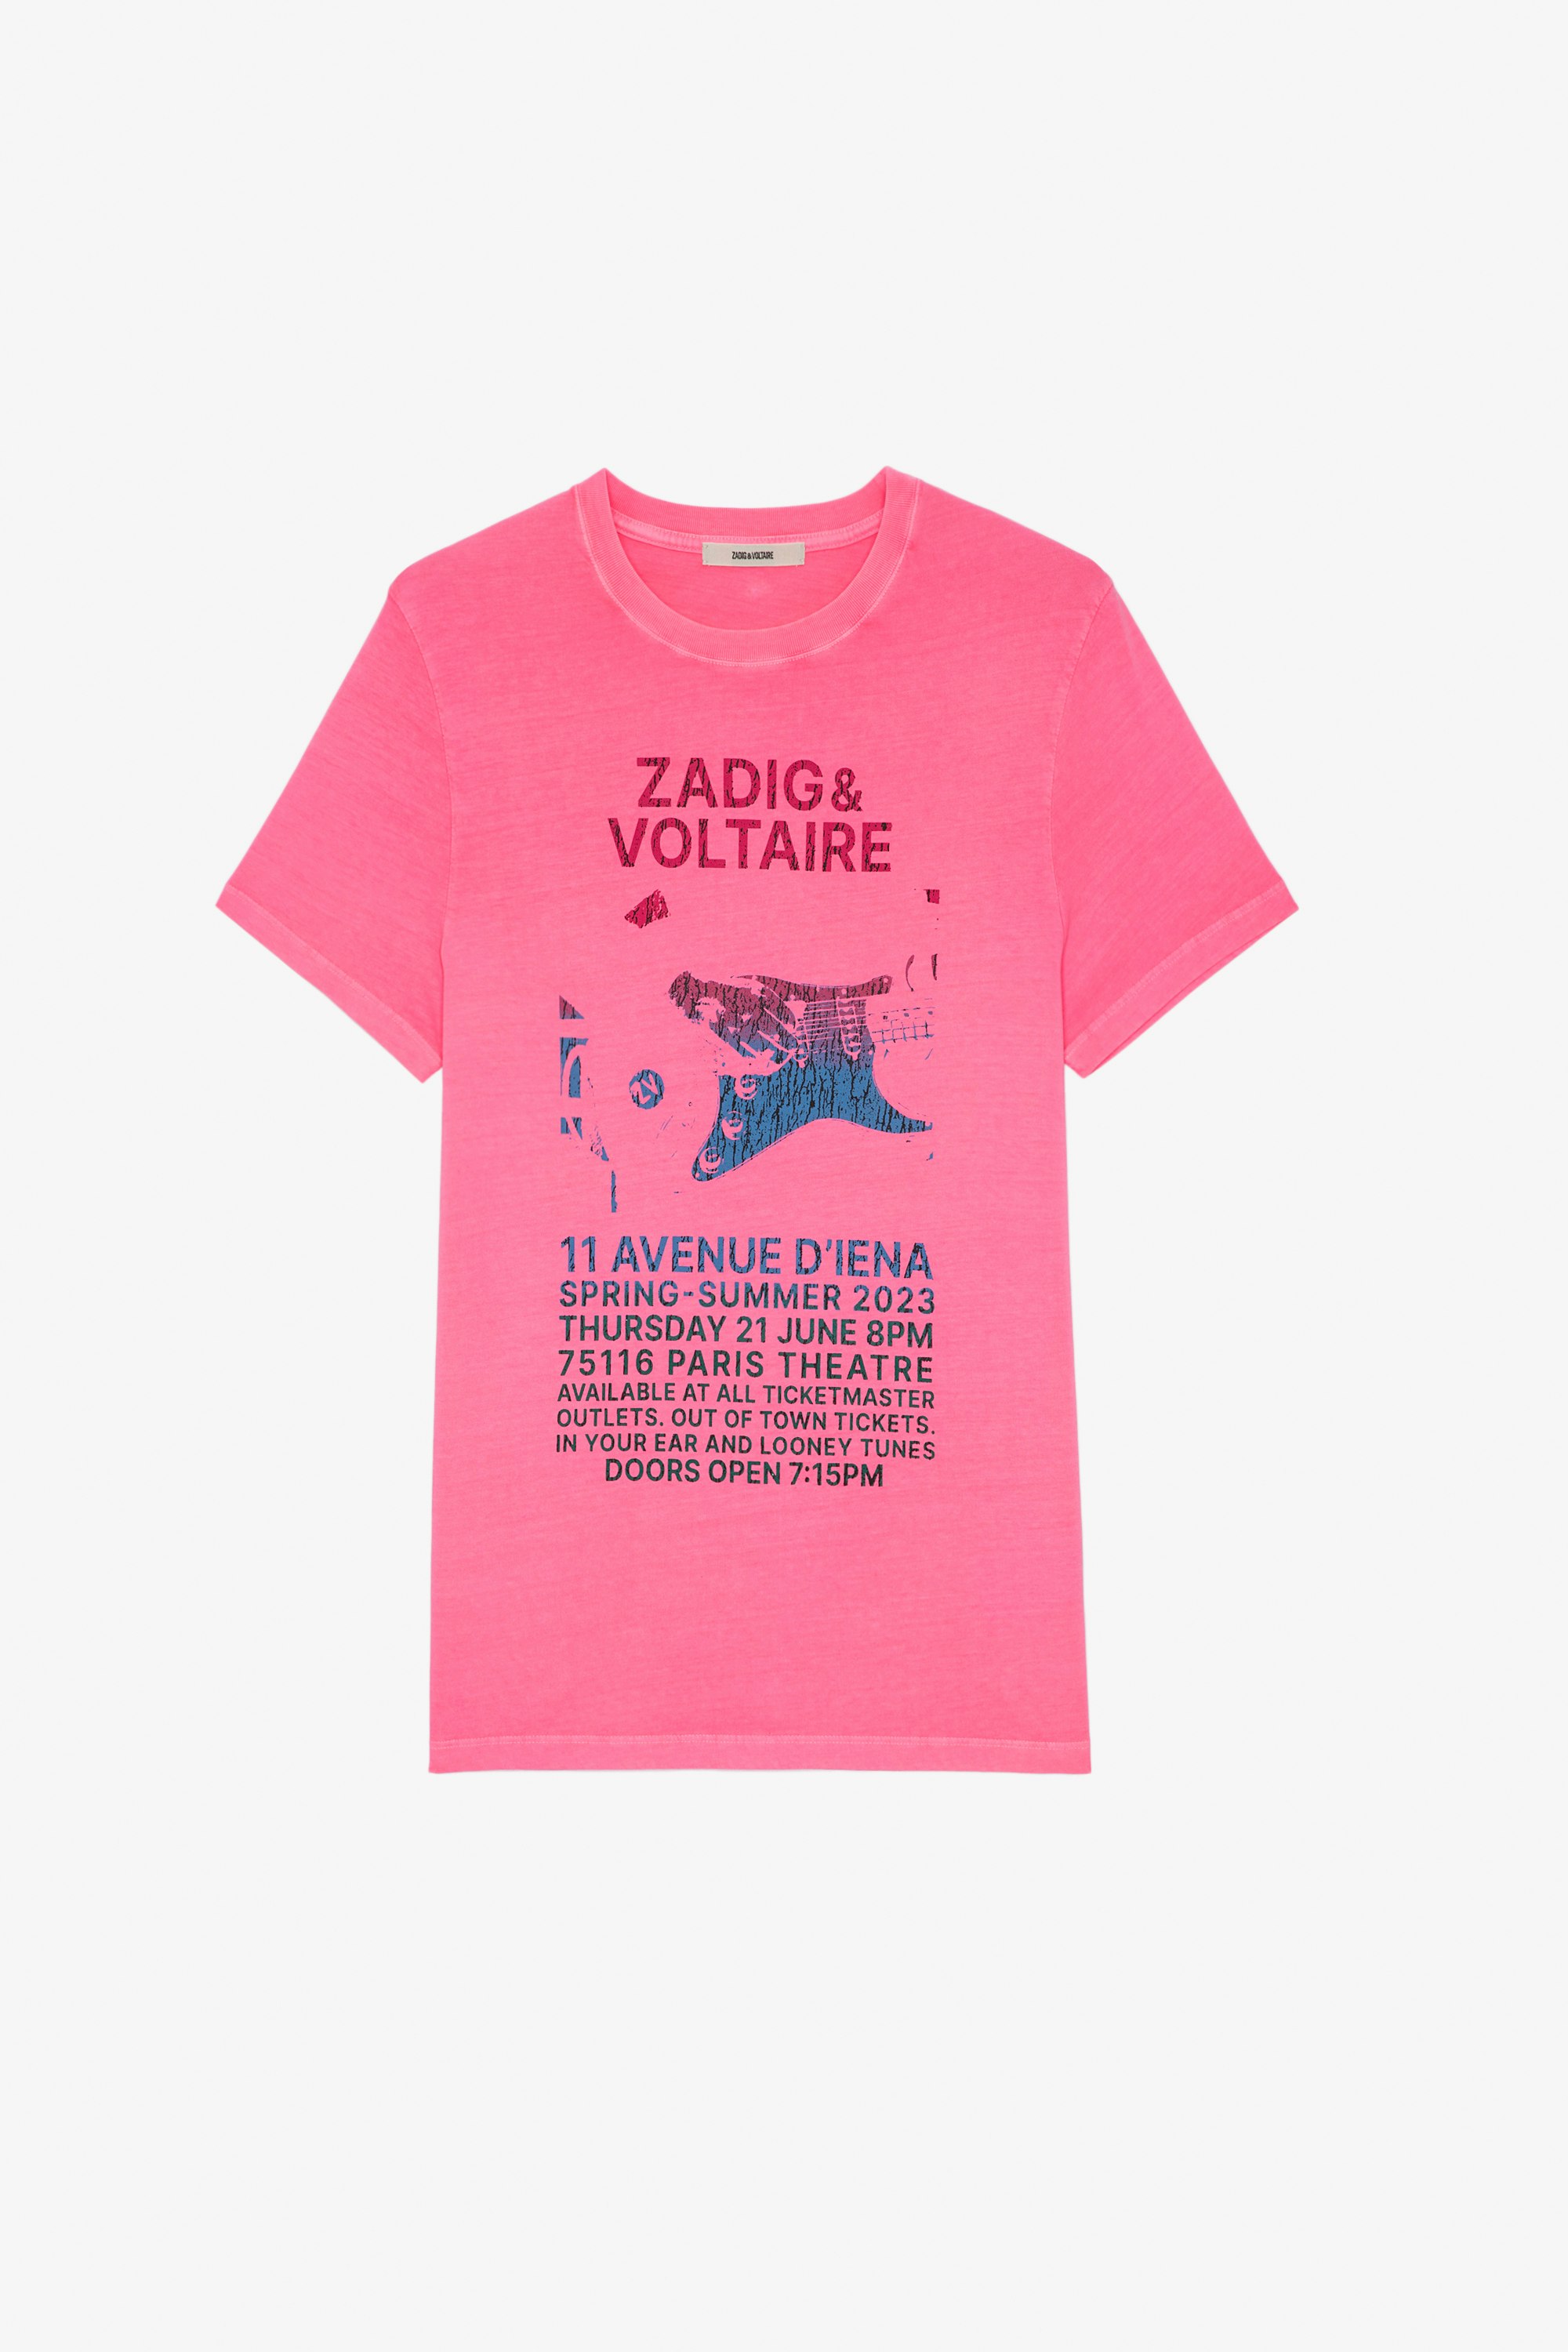 Tommy T-shirt Men’s pink cotton T-shirt with a photoprint on the front